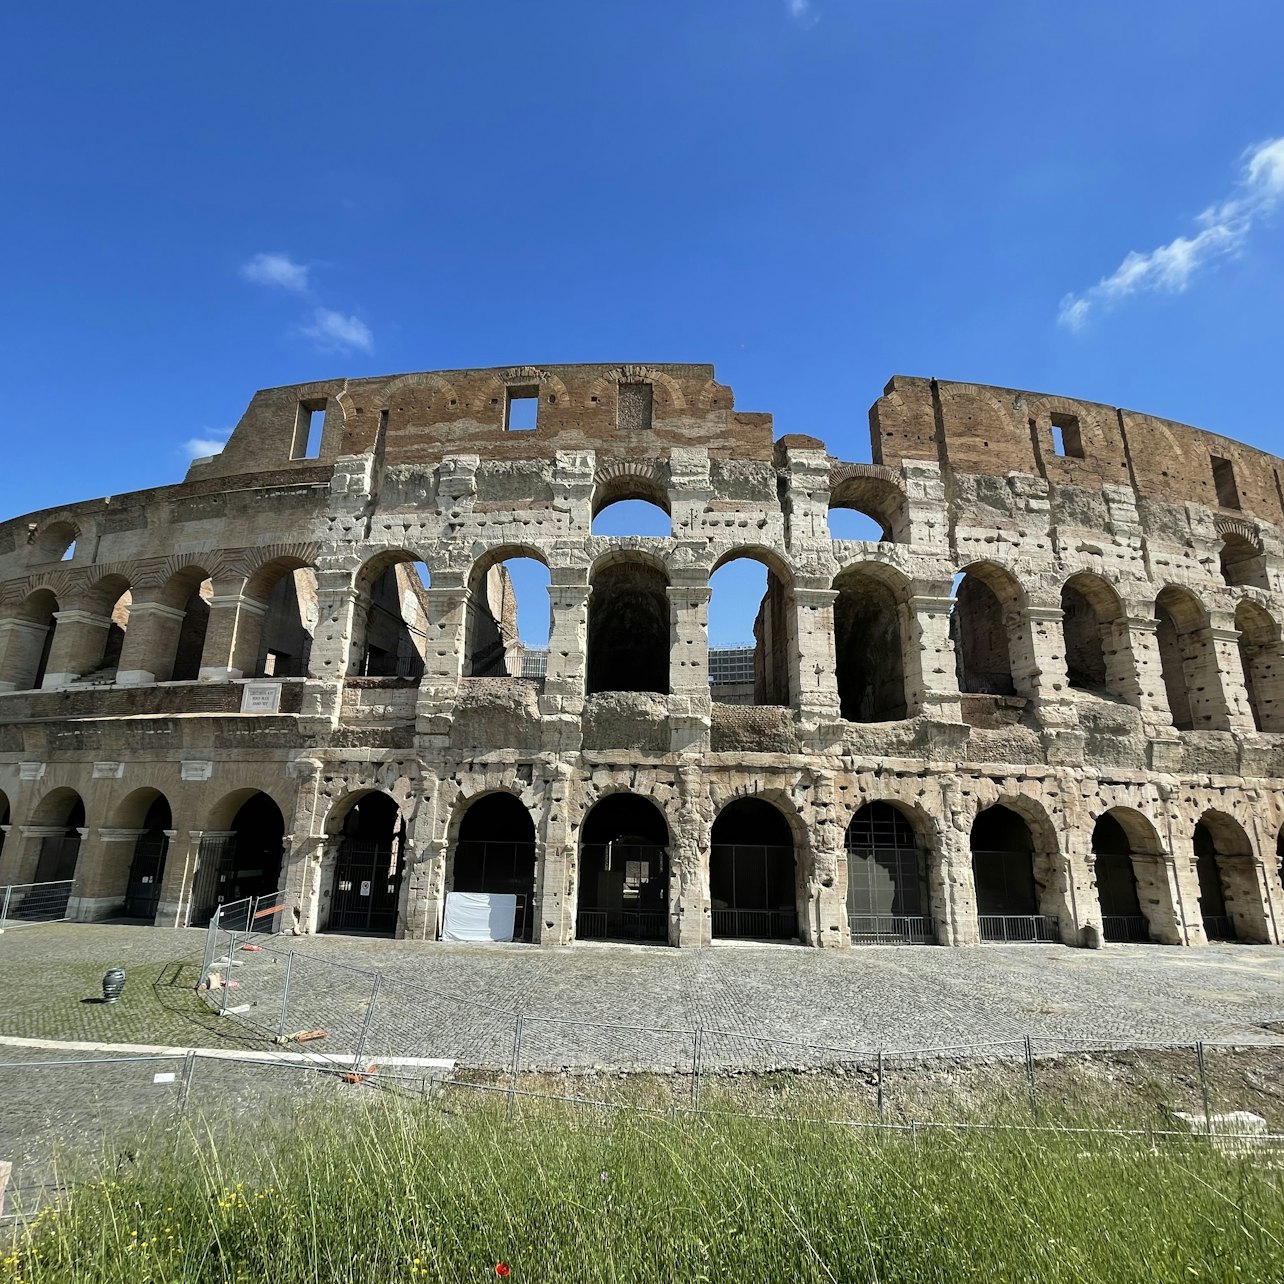 Colosseum & Arena Floor: Guided Tour - Accommodations in Rome